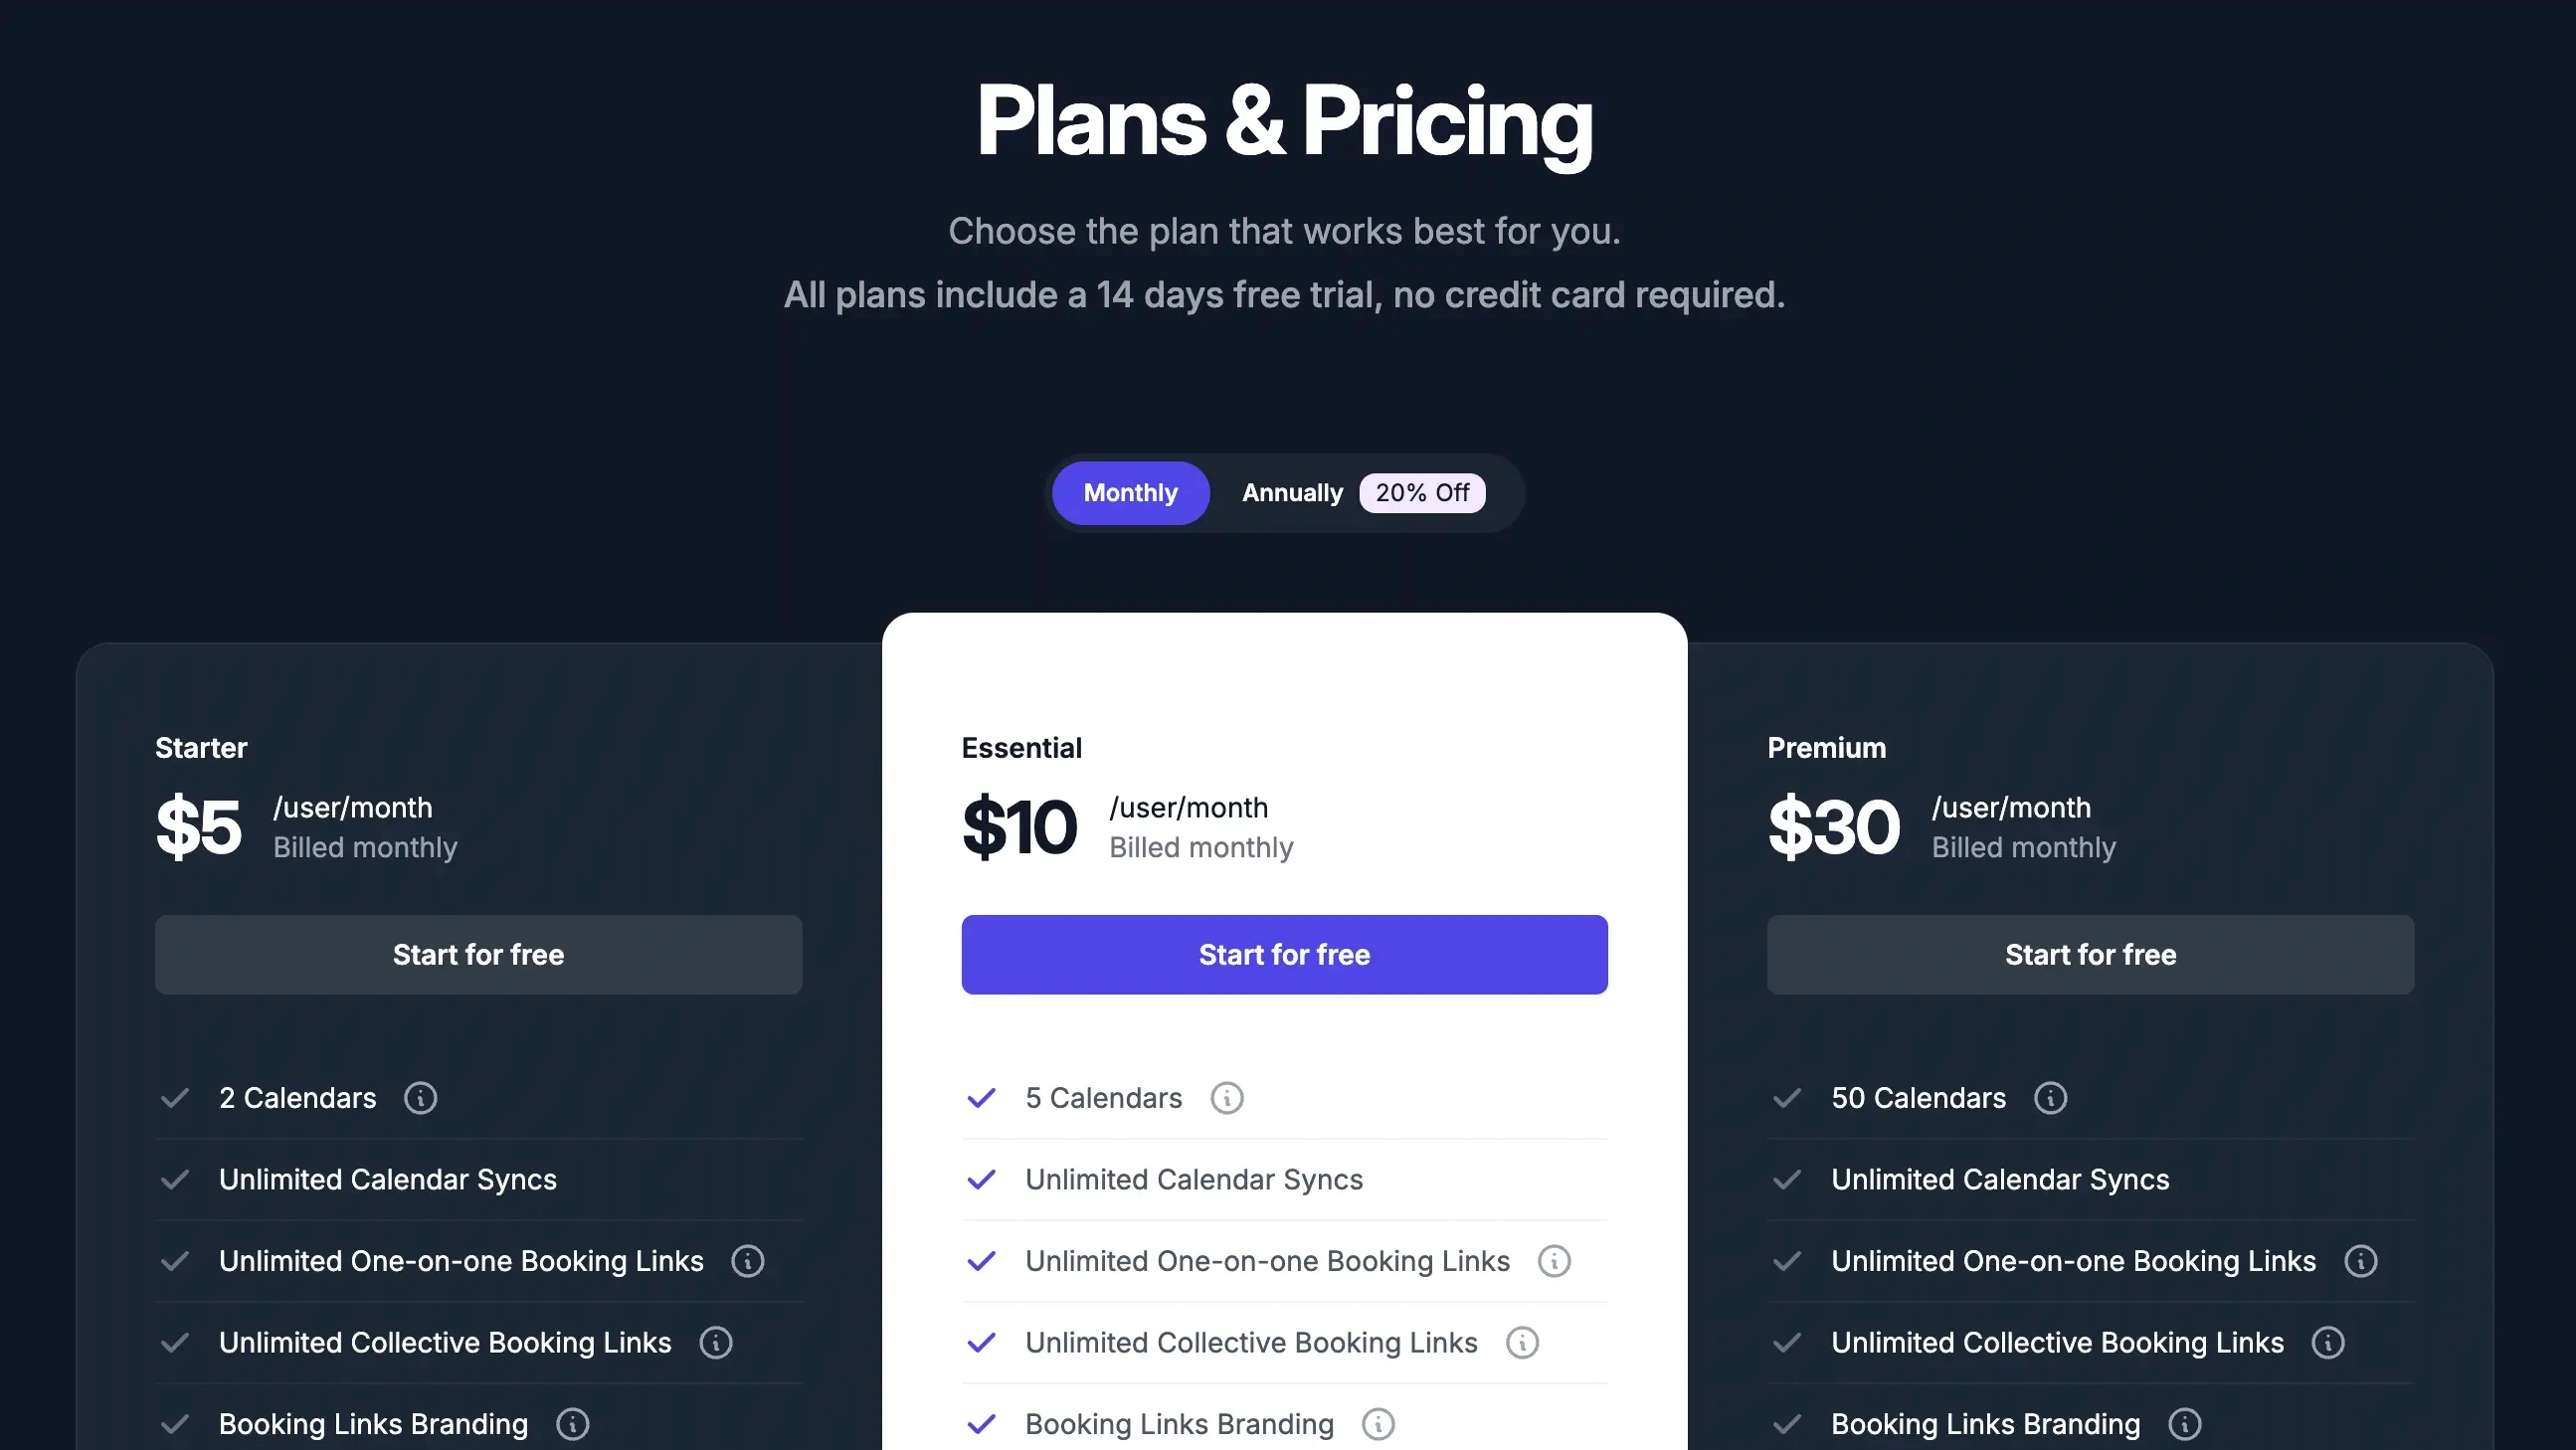 OneCal plans and pricing